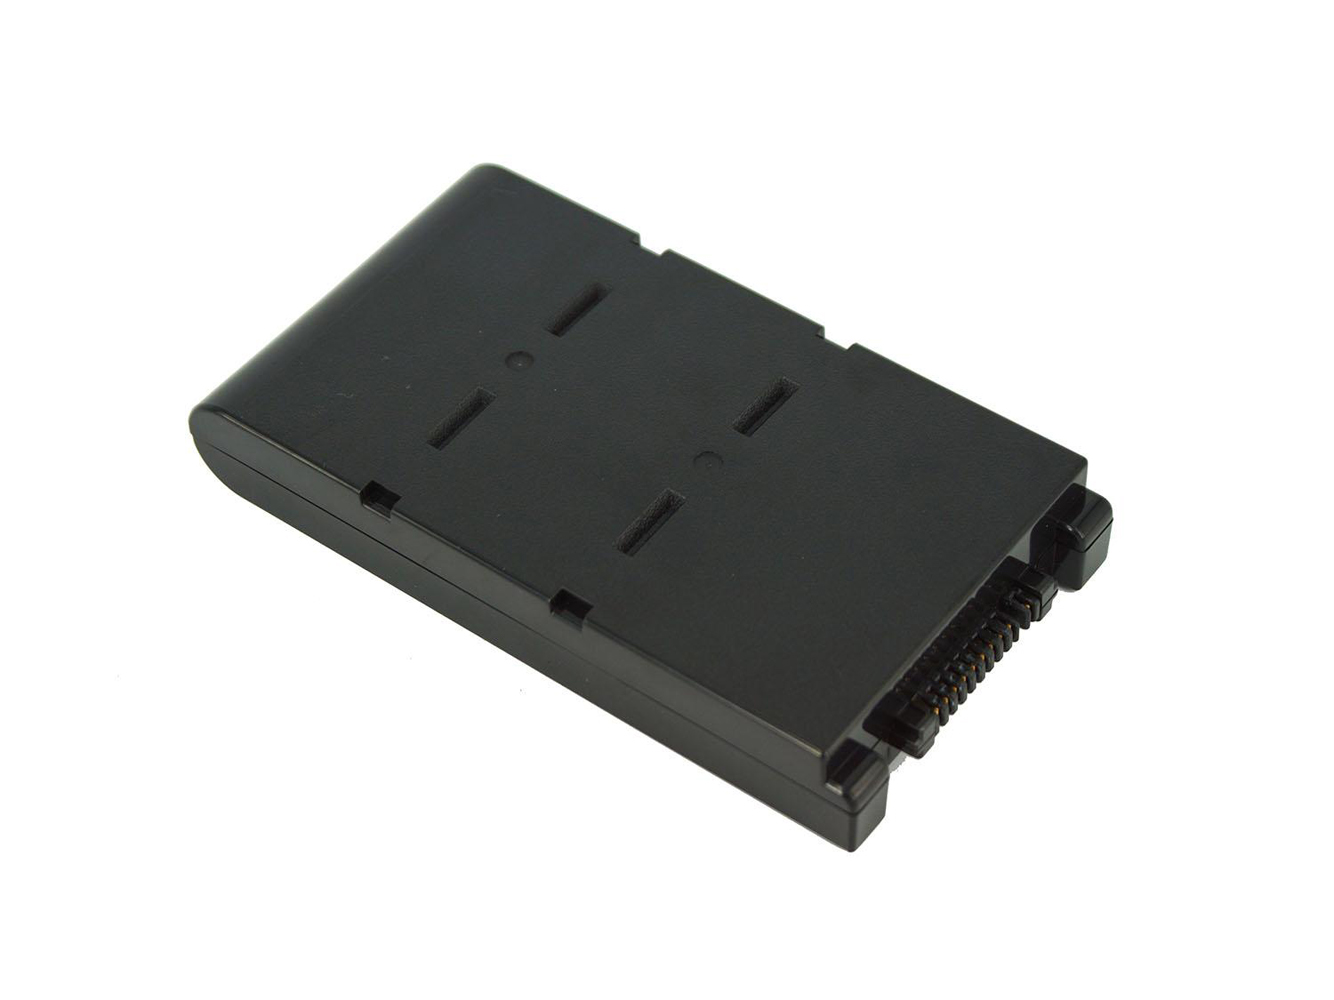 Replacement for TOSHIBA Dynabook A9, TOSHIBA Dynabook Satellite, Qosmio E15, Qosmio F15, Qosmio G15, Qosmio G25, Satellite, Satellite A10, Satellite A15, Tecra A1, Tecra A8 Series Laptop Battery